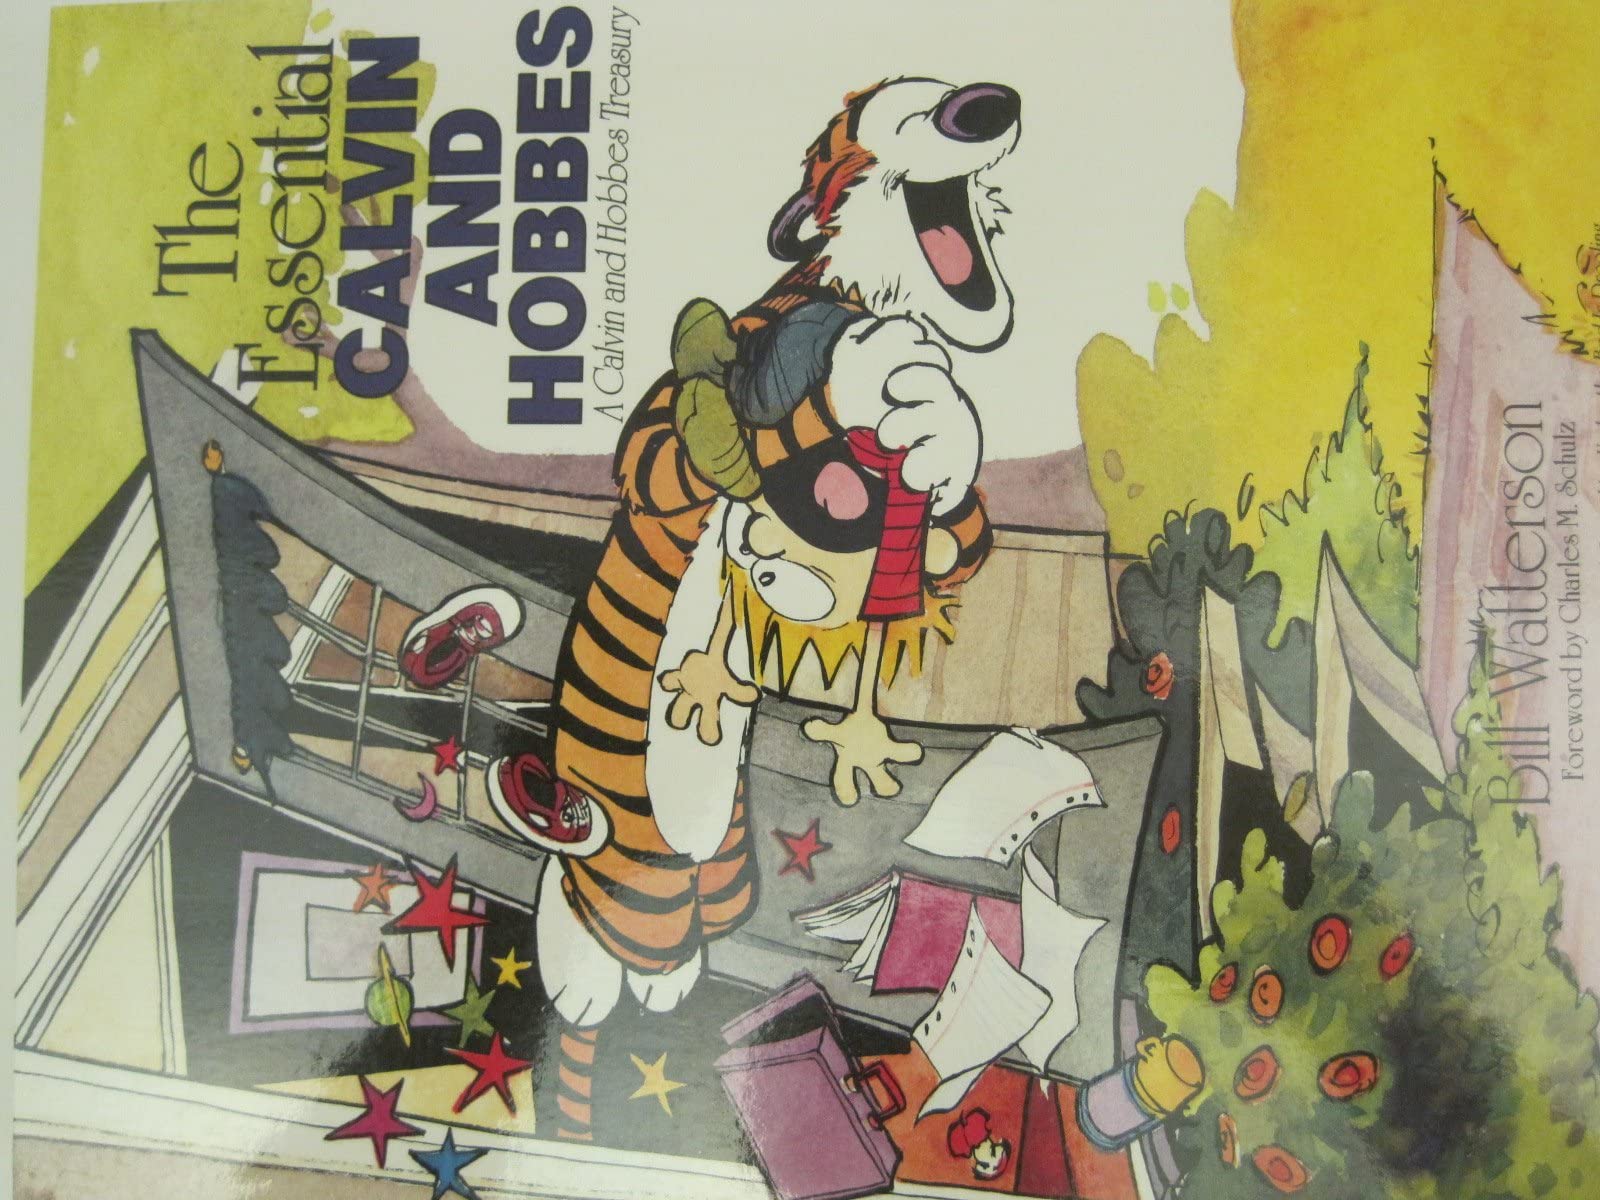 The Essential Calvin and Hobbes: a Calvin and Hobbes Treasury